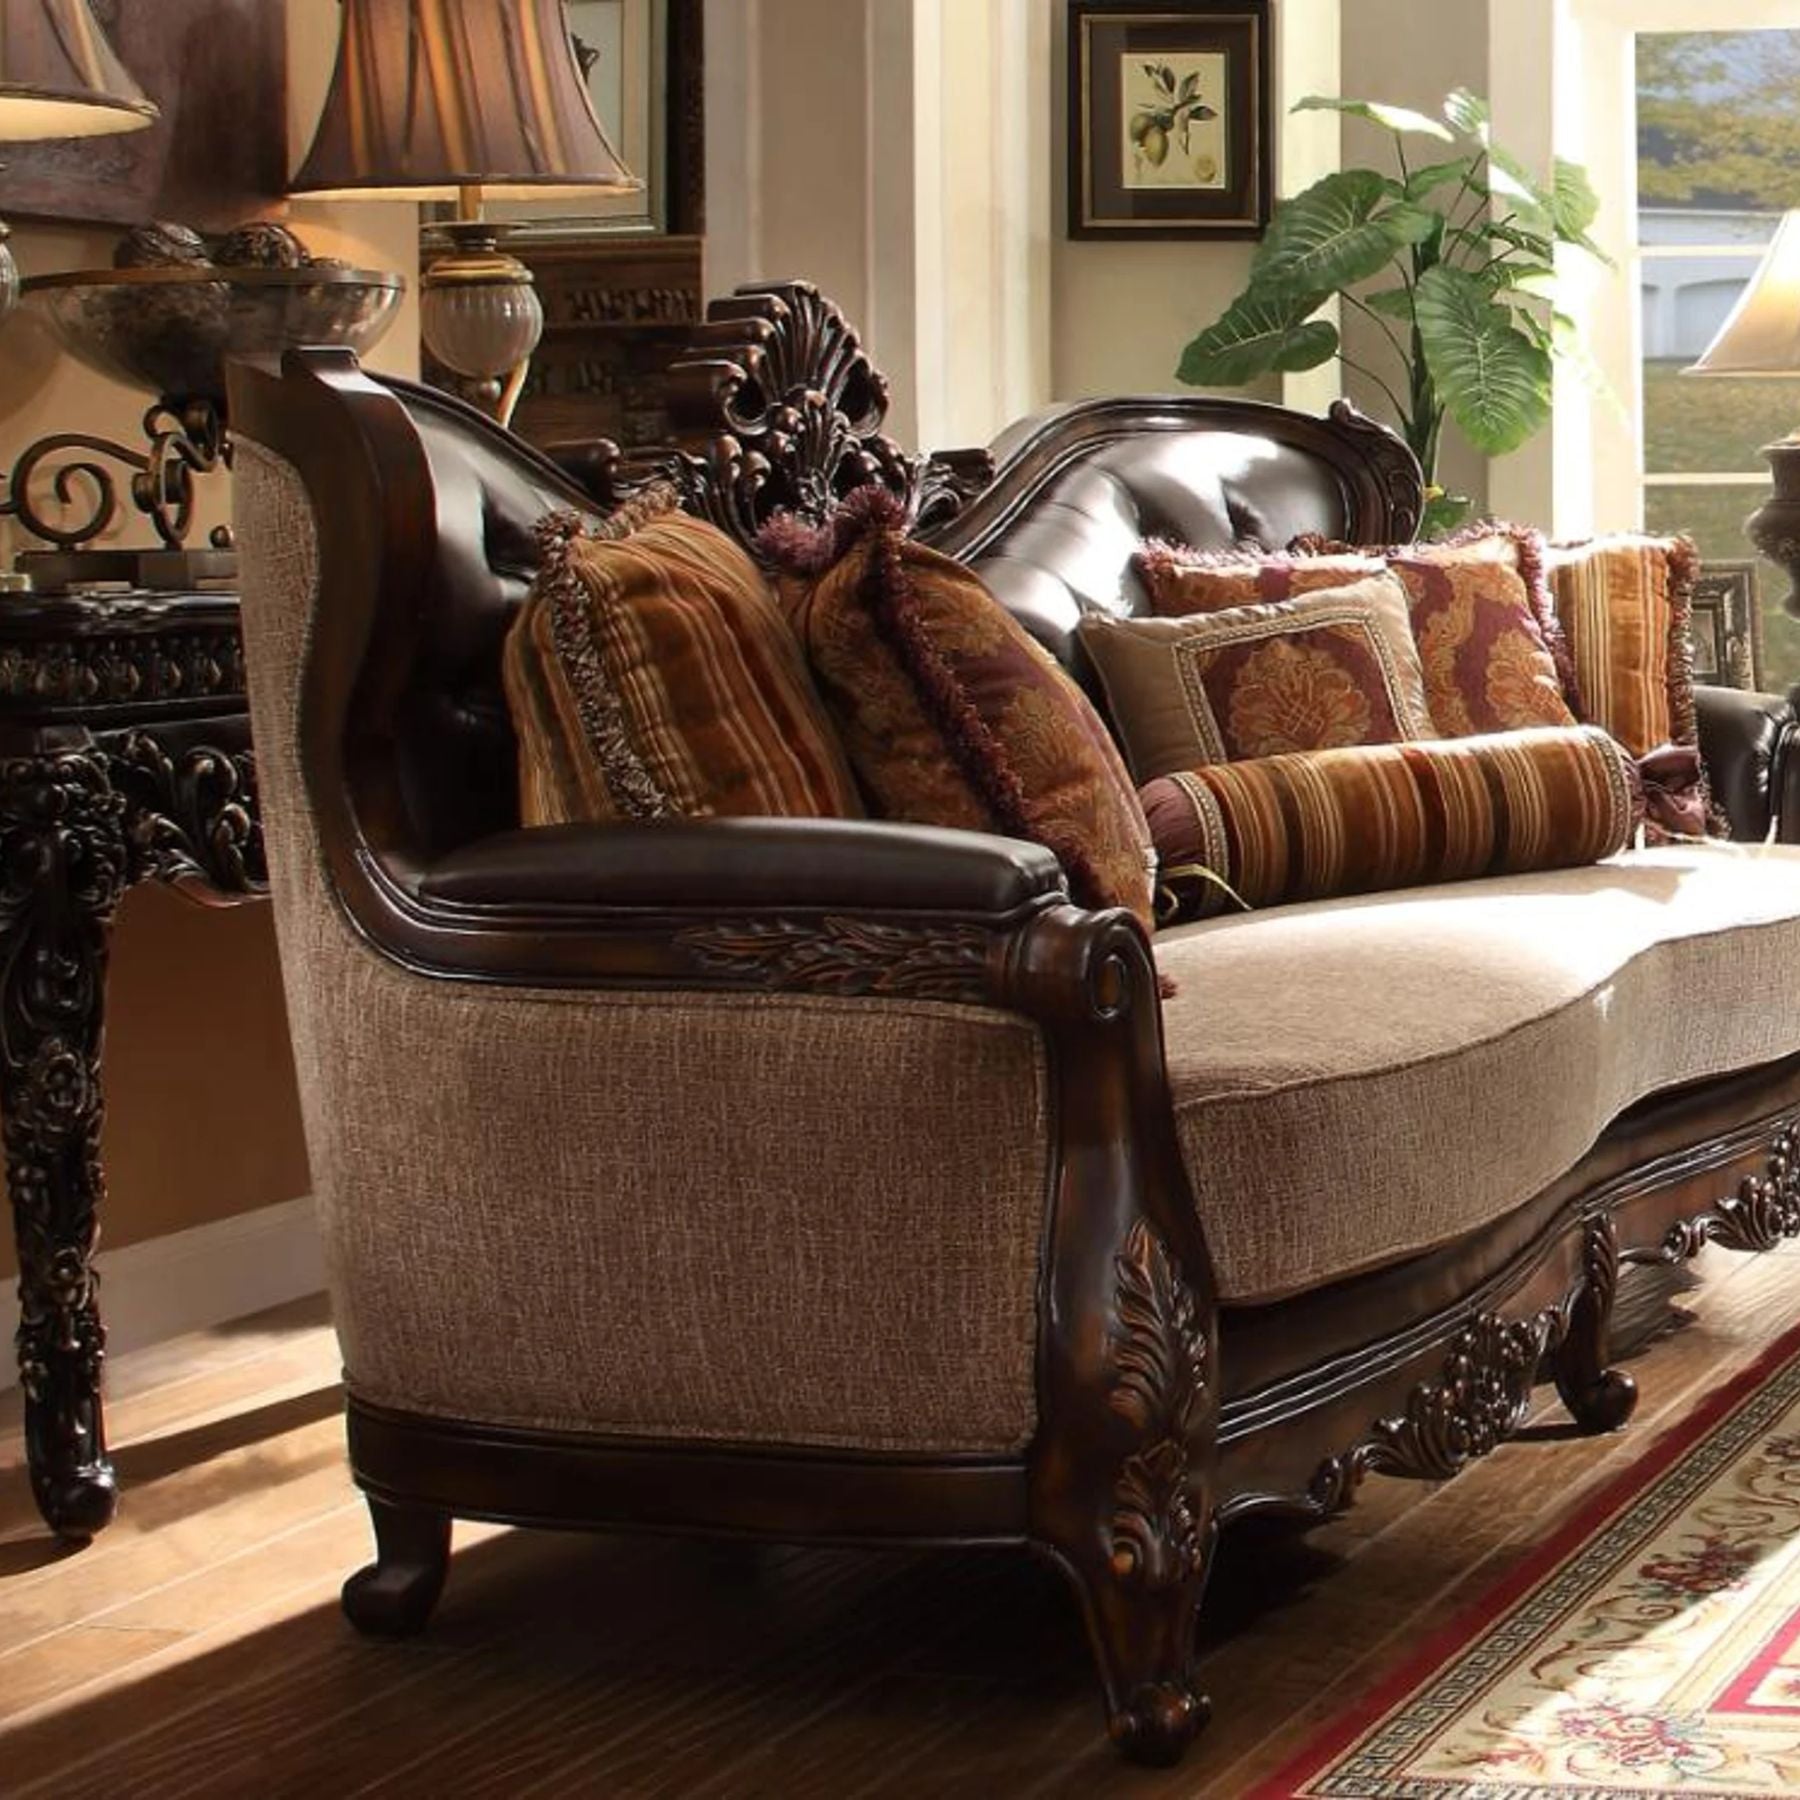 leather on the other hand is a timeless choice that balances luxury and warmth adding a dramatic look to finely crafted armchairs and detailed furnishings